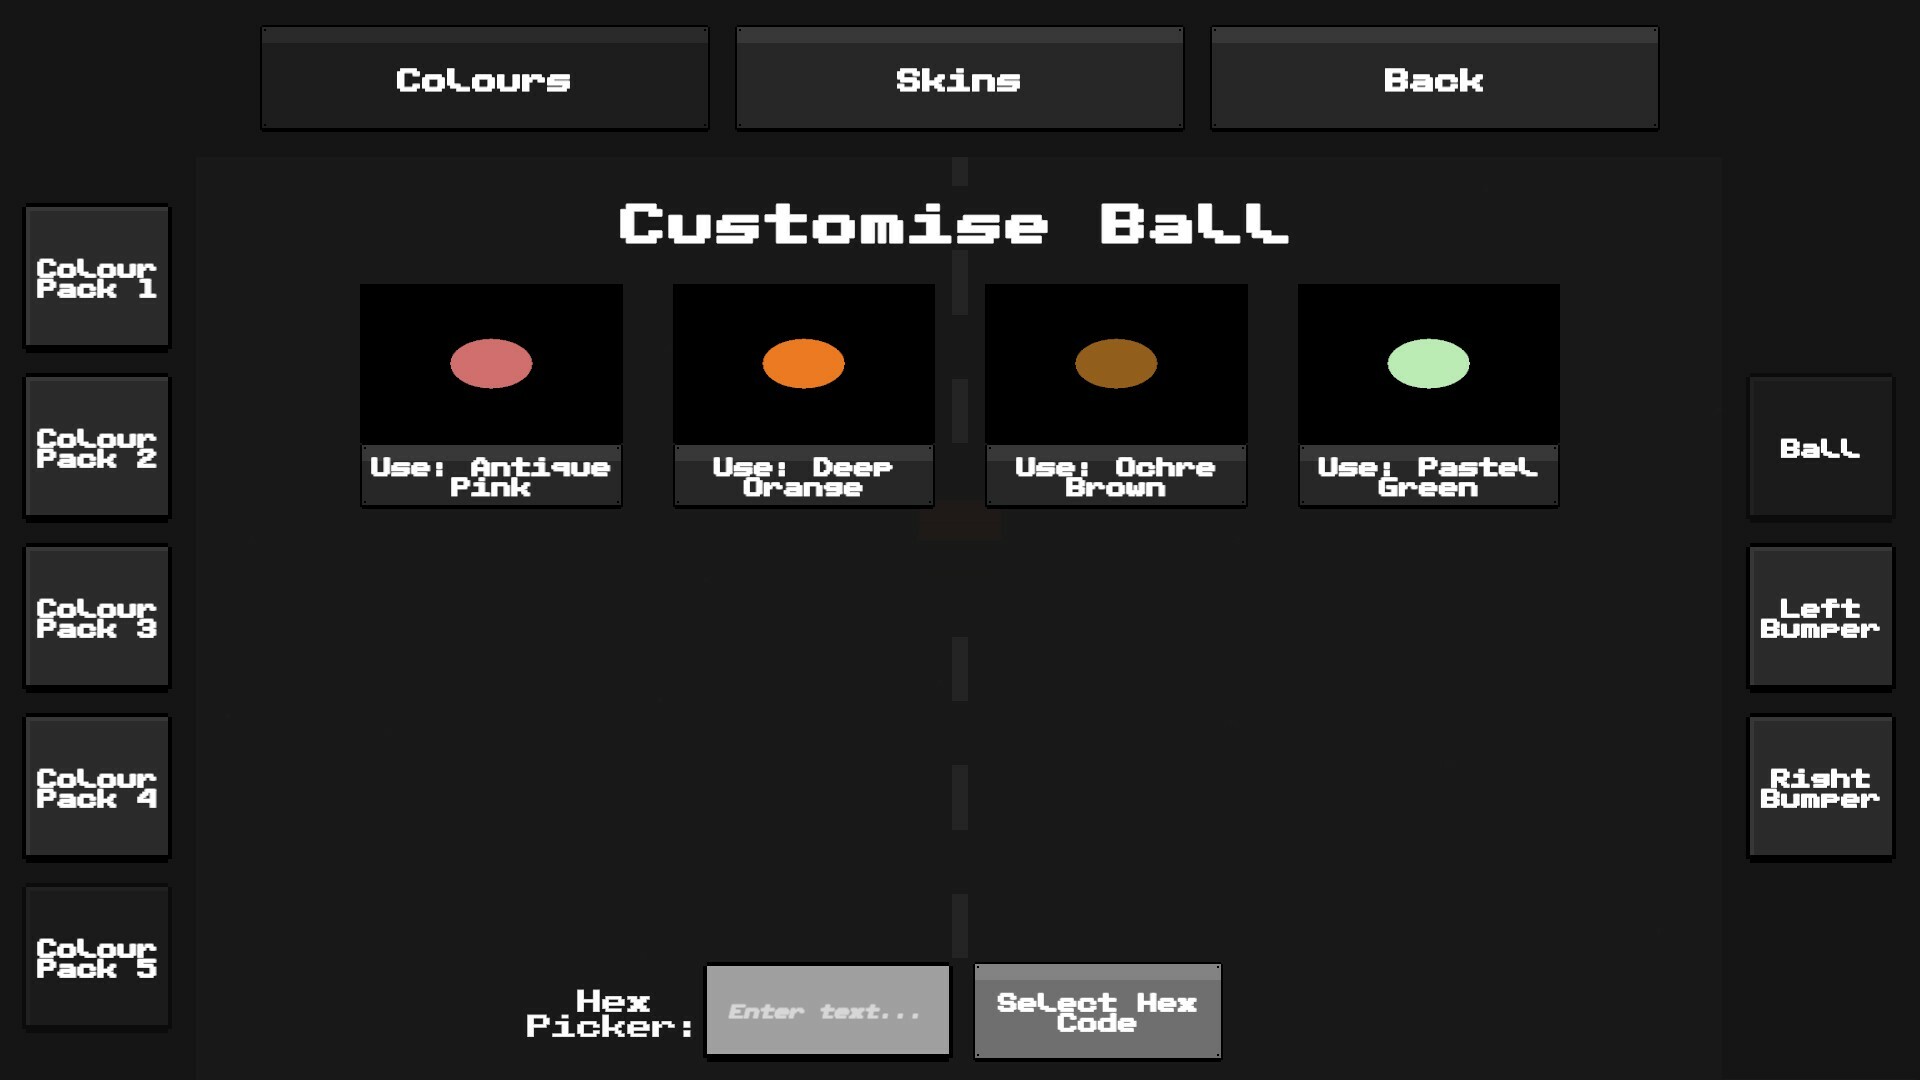 Table Ball - Colour Pack 4 Featured Screenshot #1